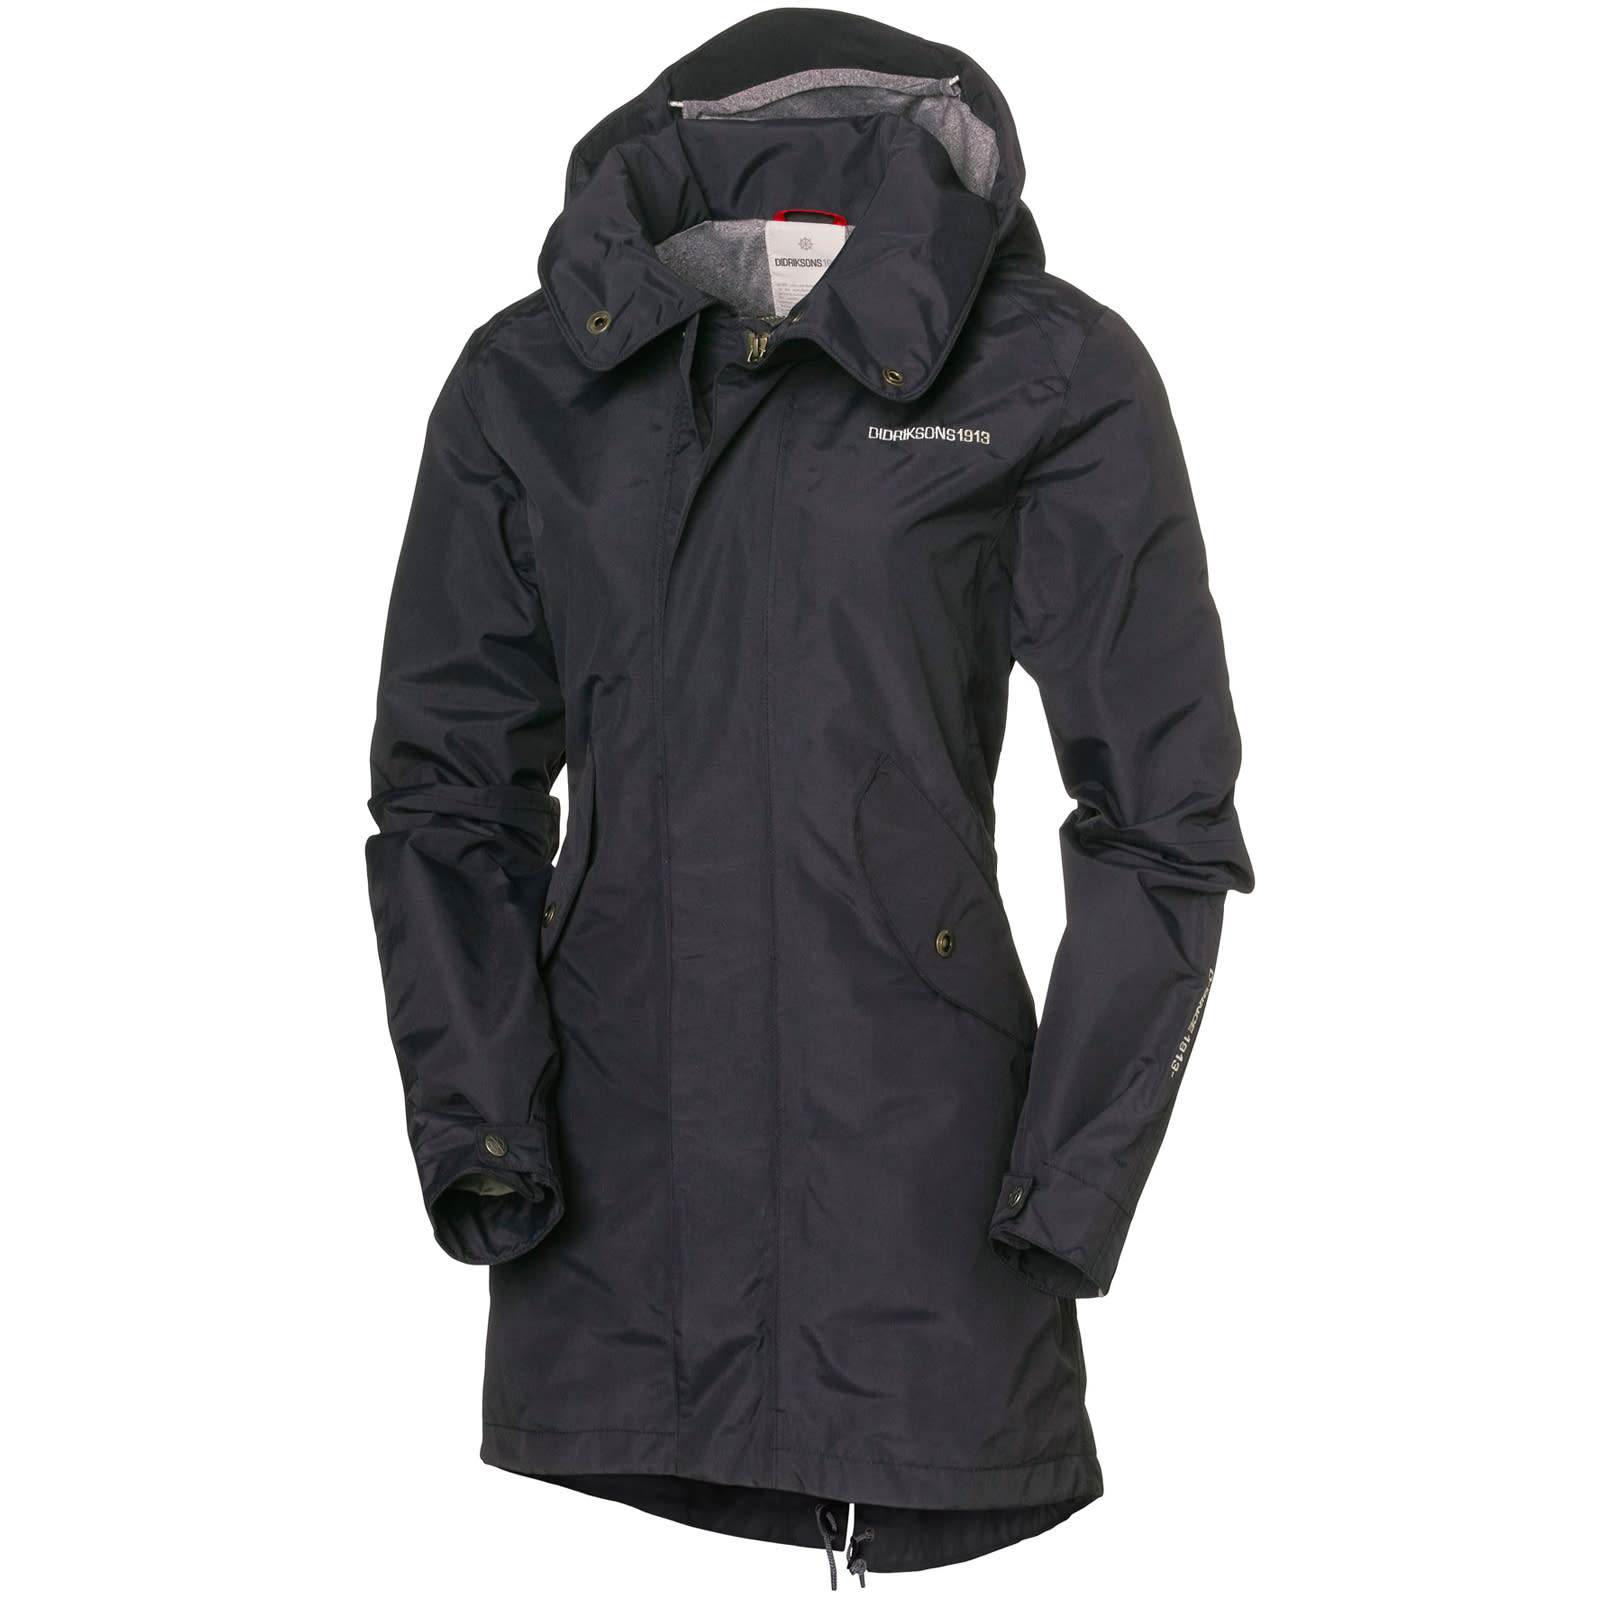 Buy Didriksons Annie Women's Parka from Outnorth